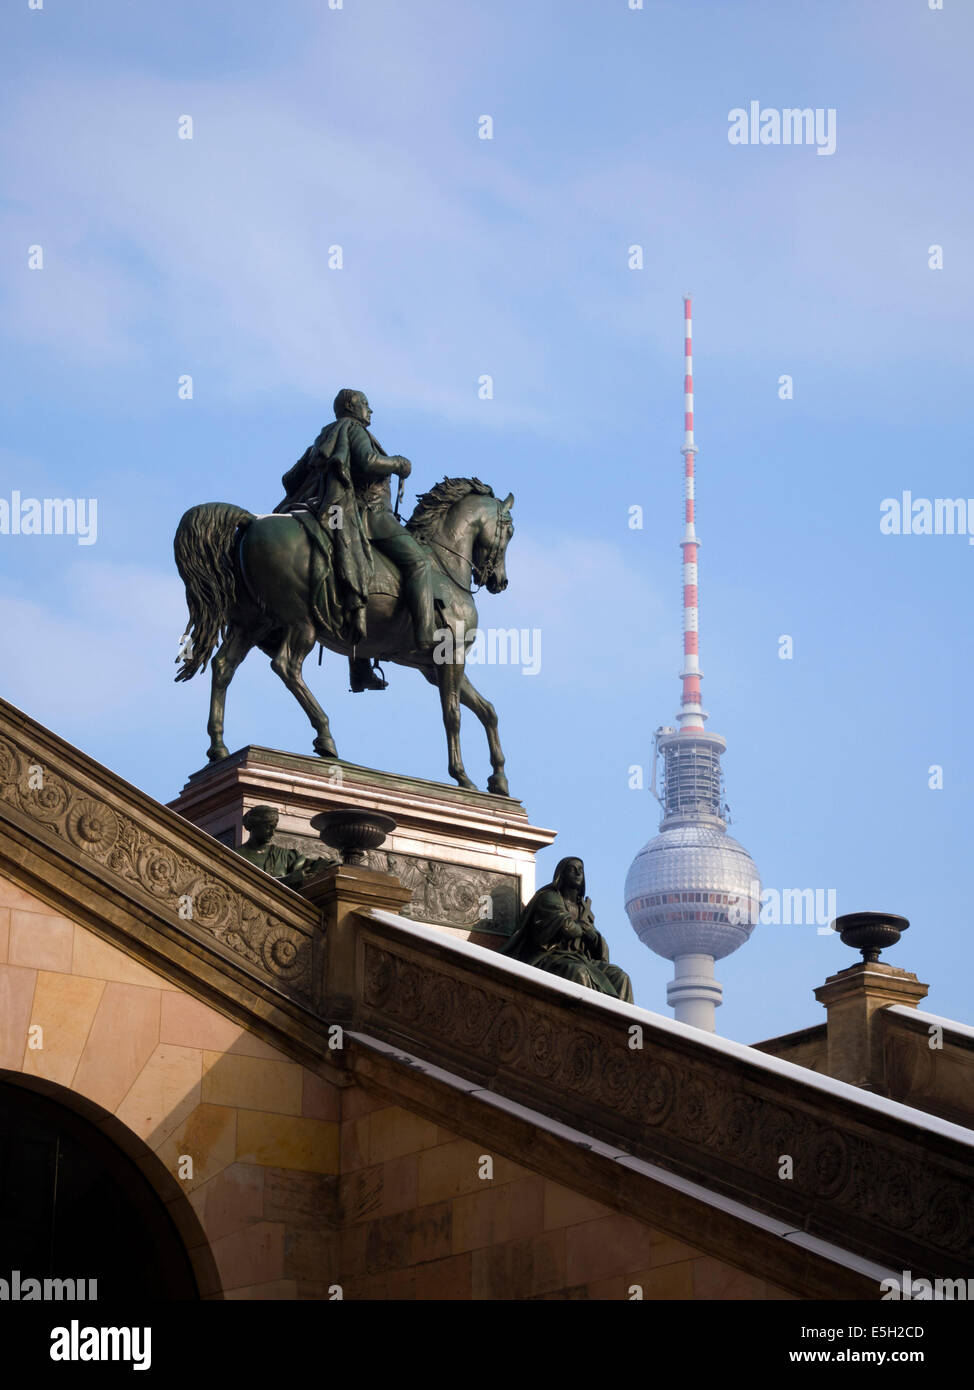 equestrian statue of Frederick William IV on the entrance to Old National Gallery and Berlin TV tower behind Stock Photo